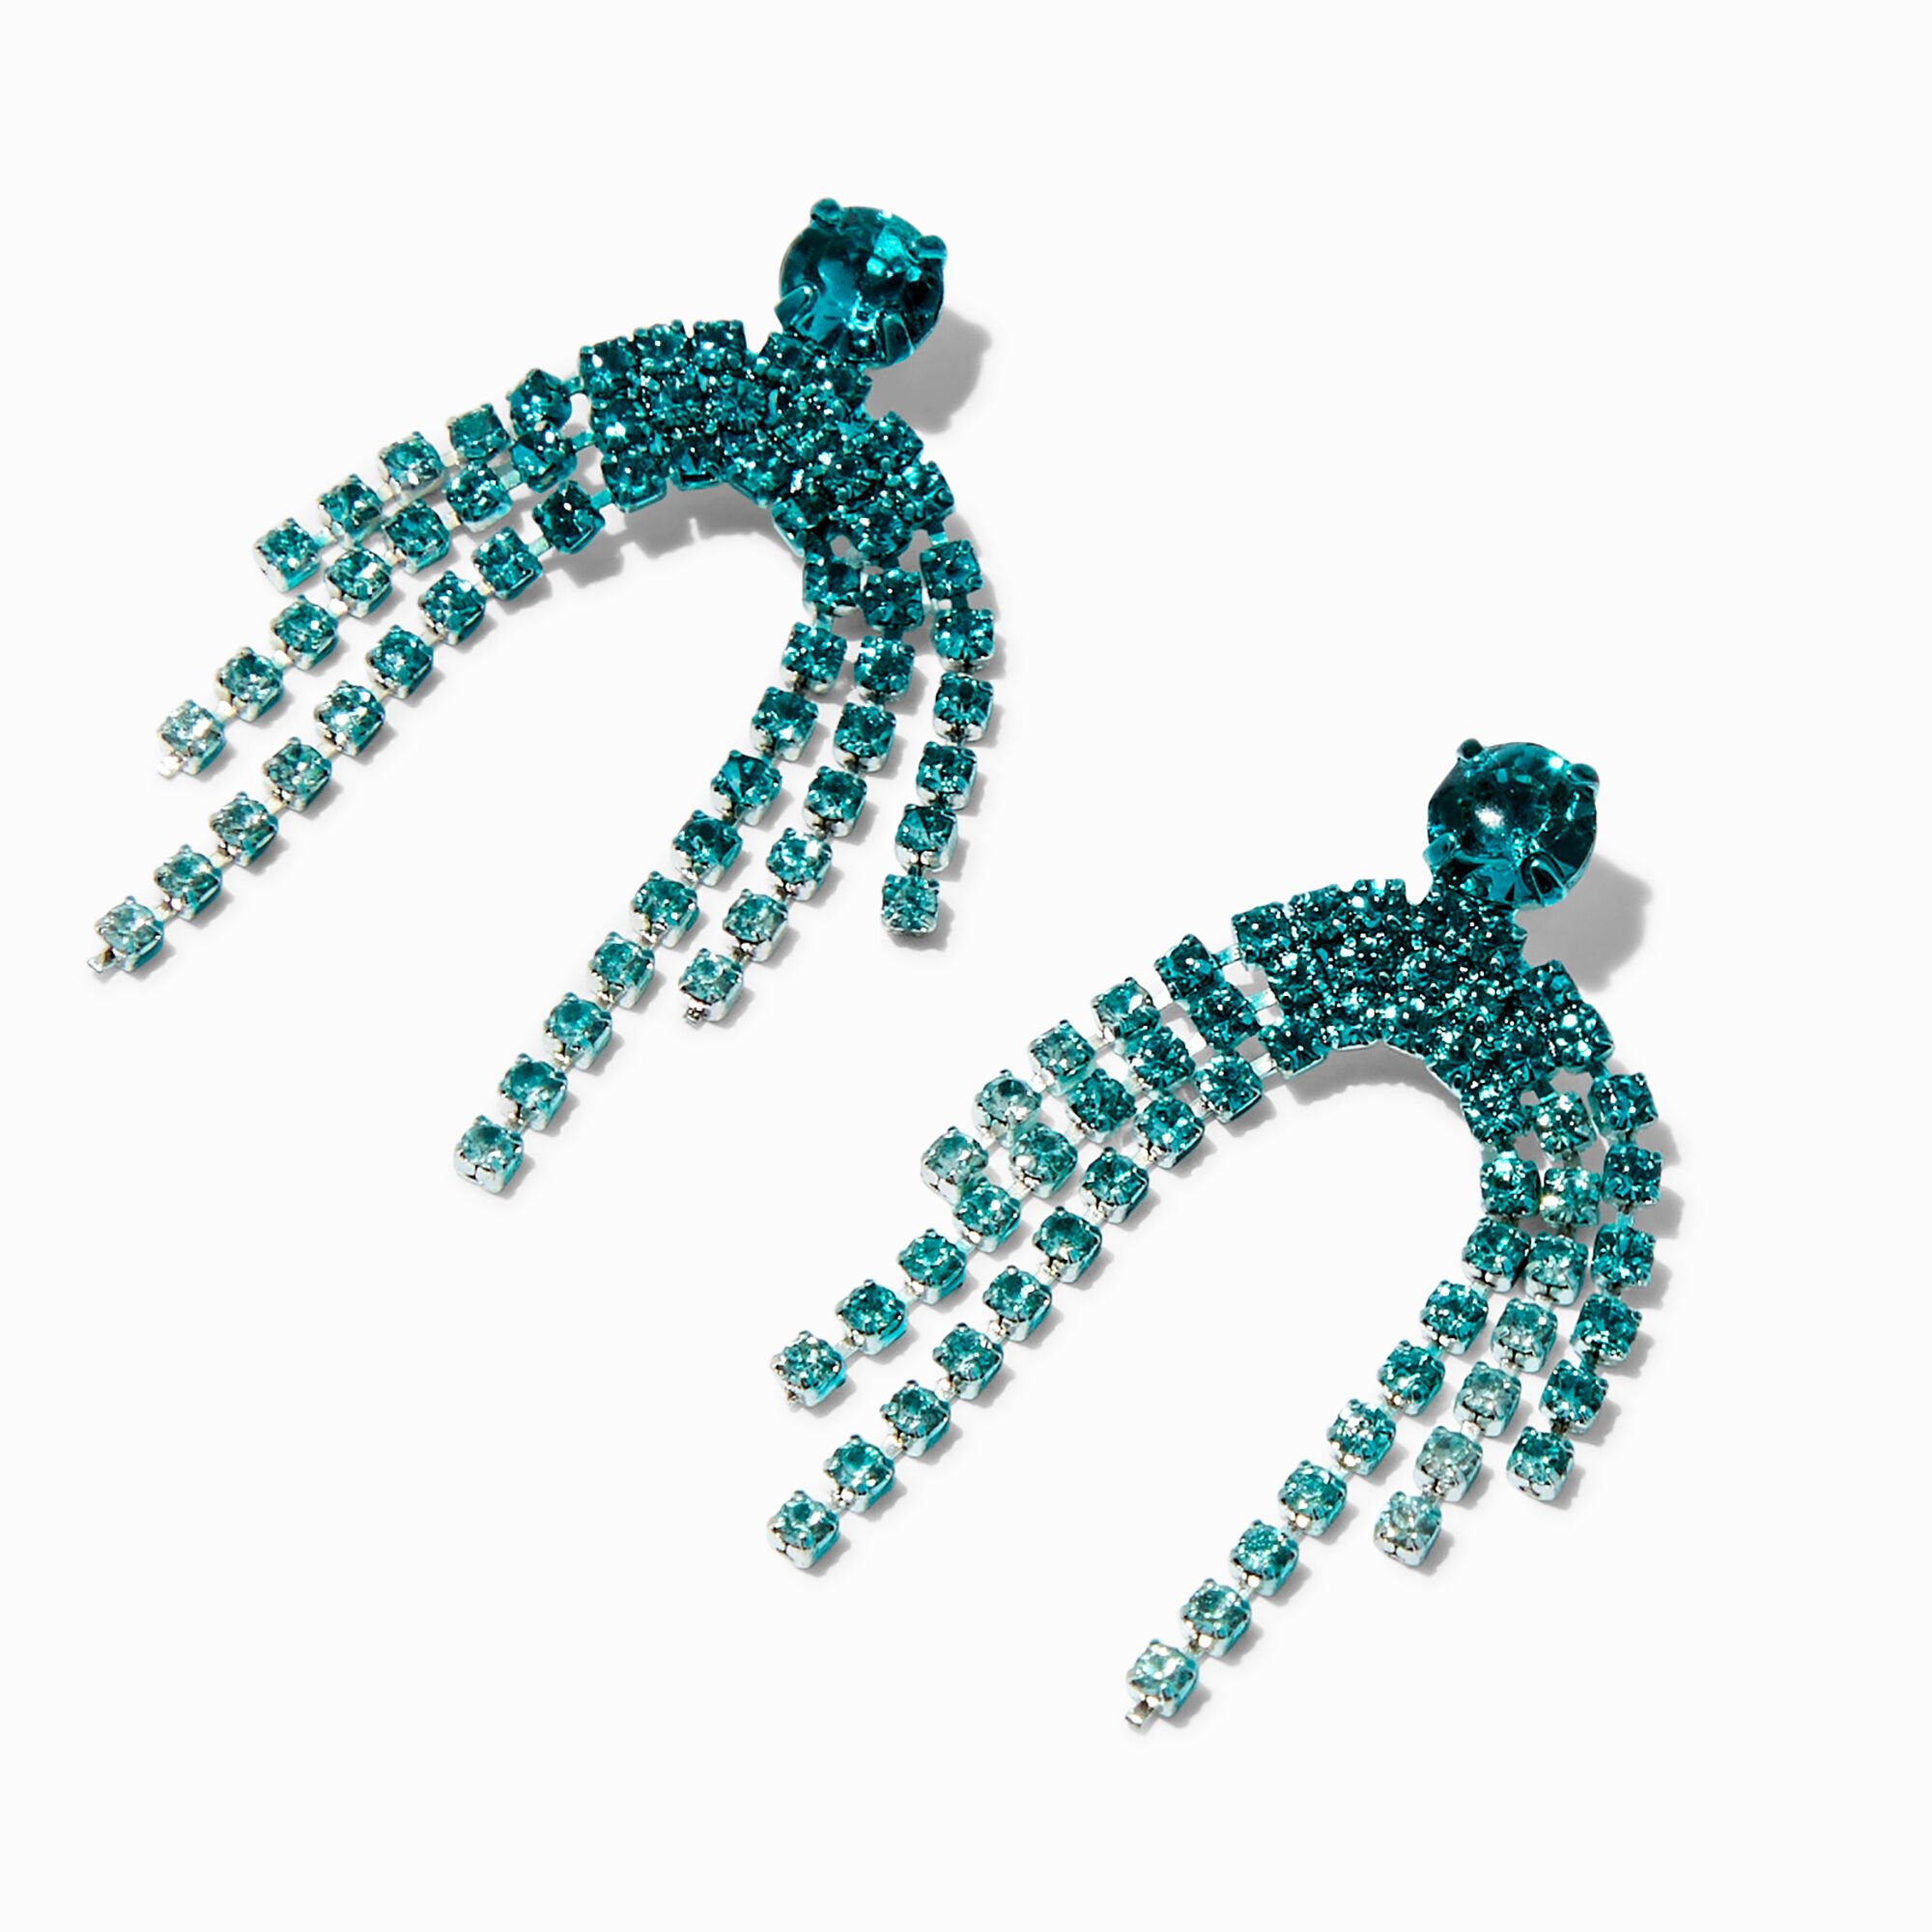 View Claires Crystal Waterfall 15 Drop Earrings Teal information